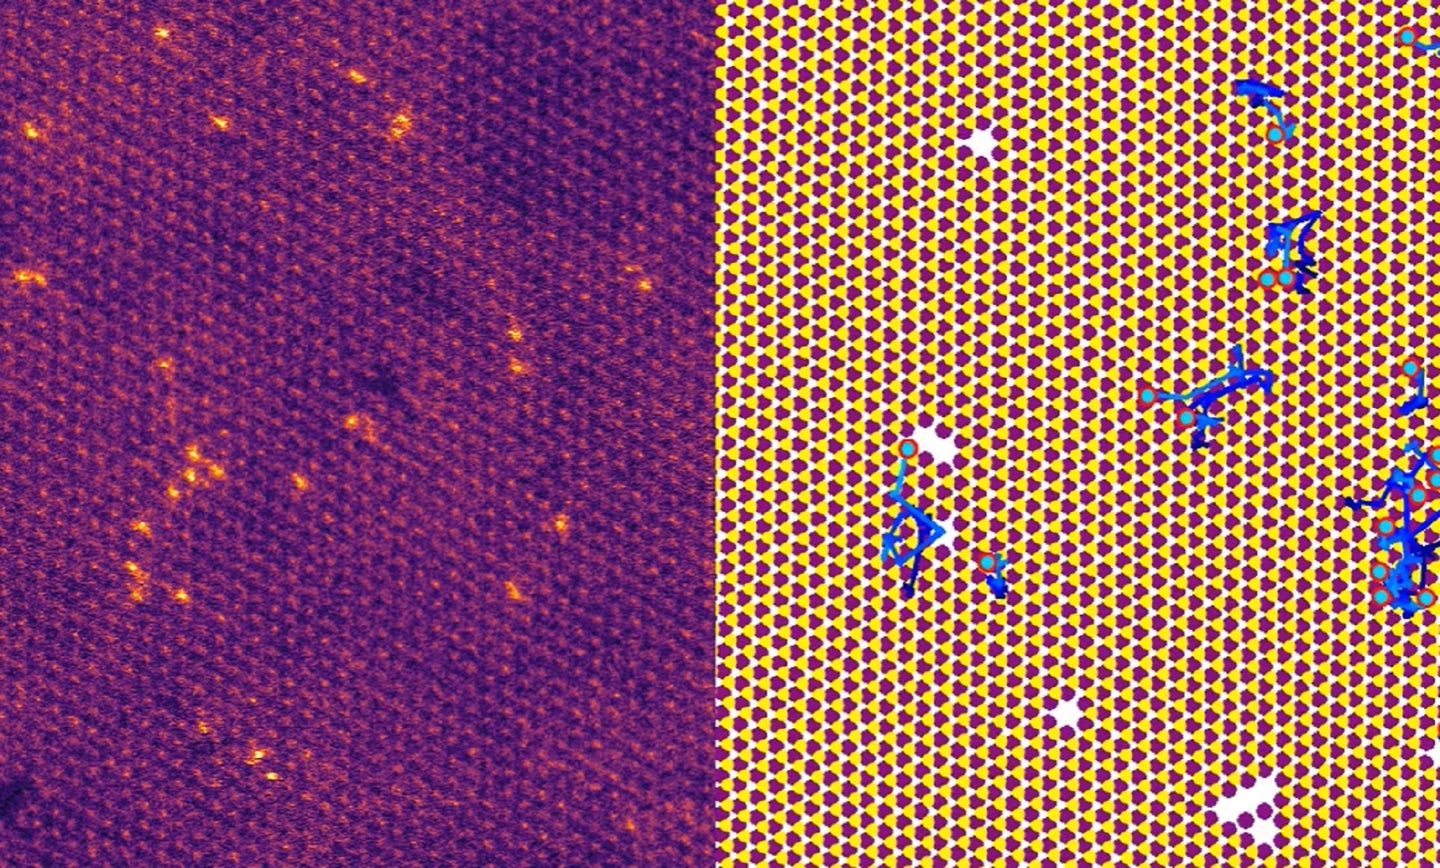 Platinum atoms and liquid graphene seen in red and purple under a microscope next to a graphic of material particle locations